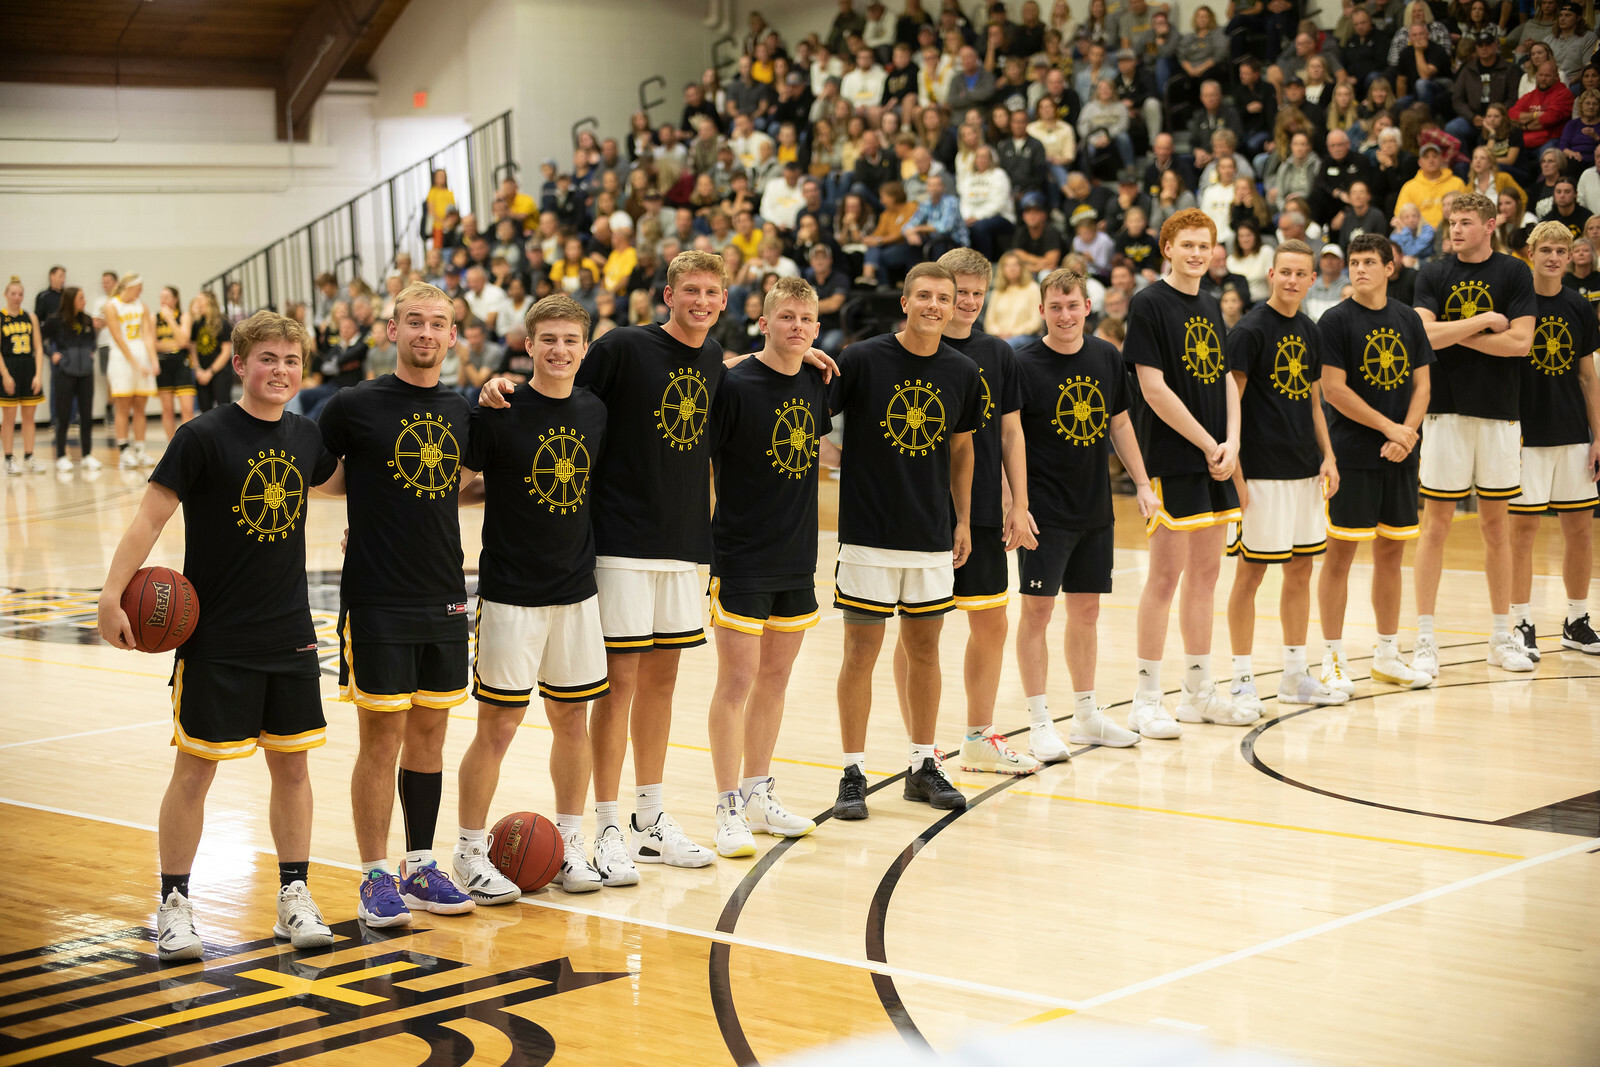 A picture of the men's basketball team